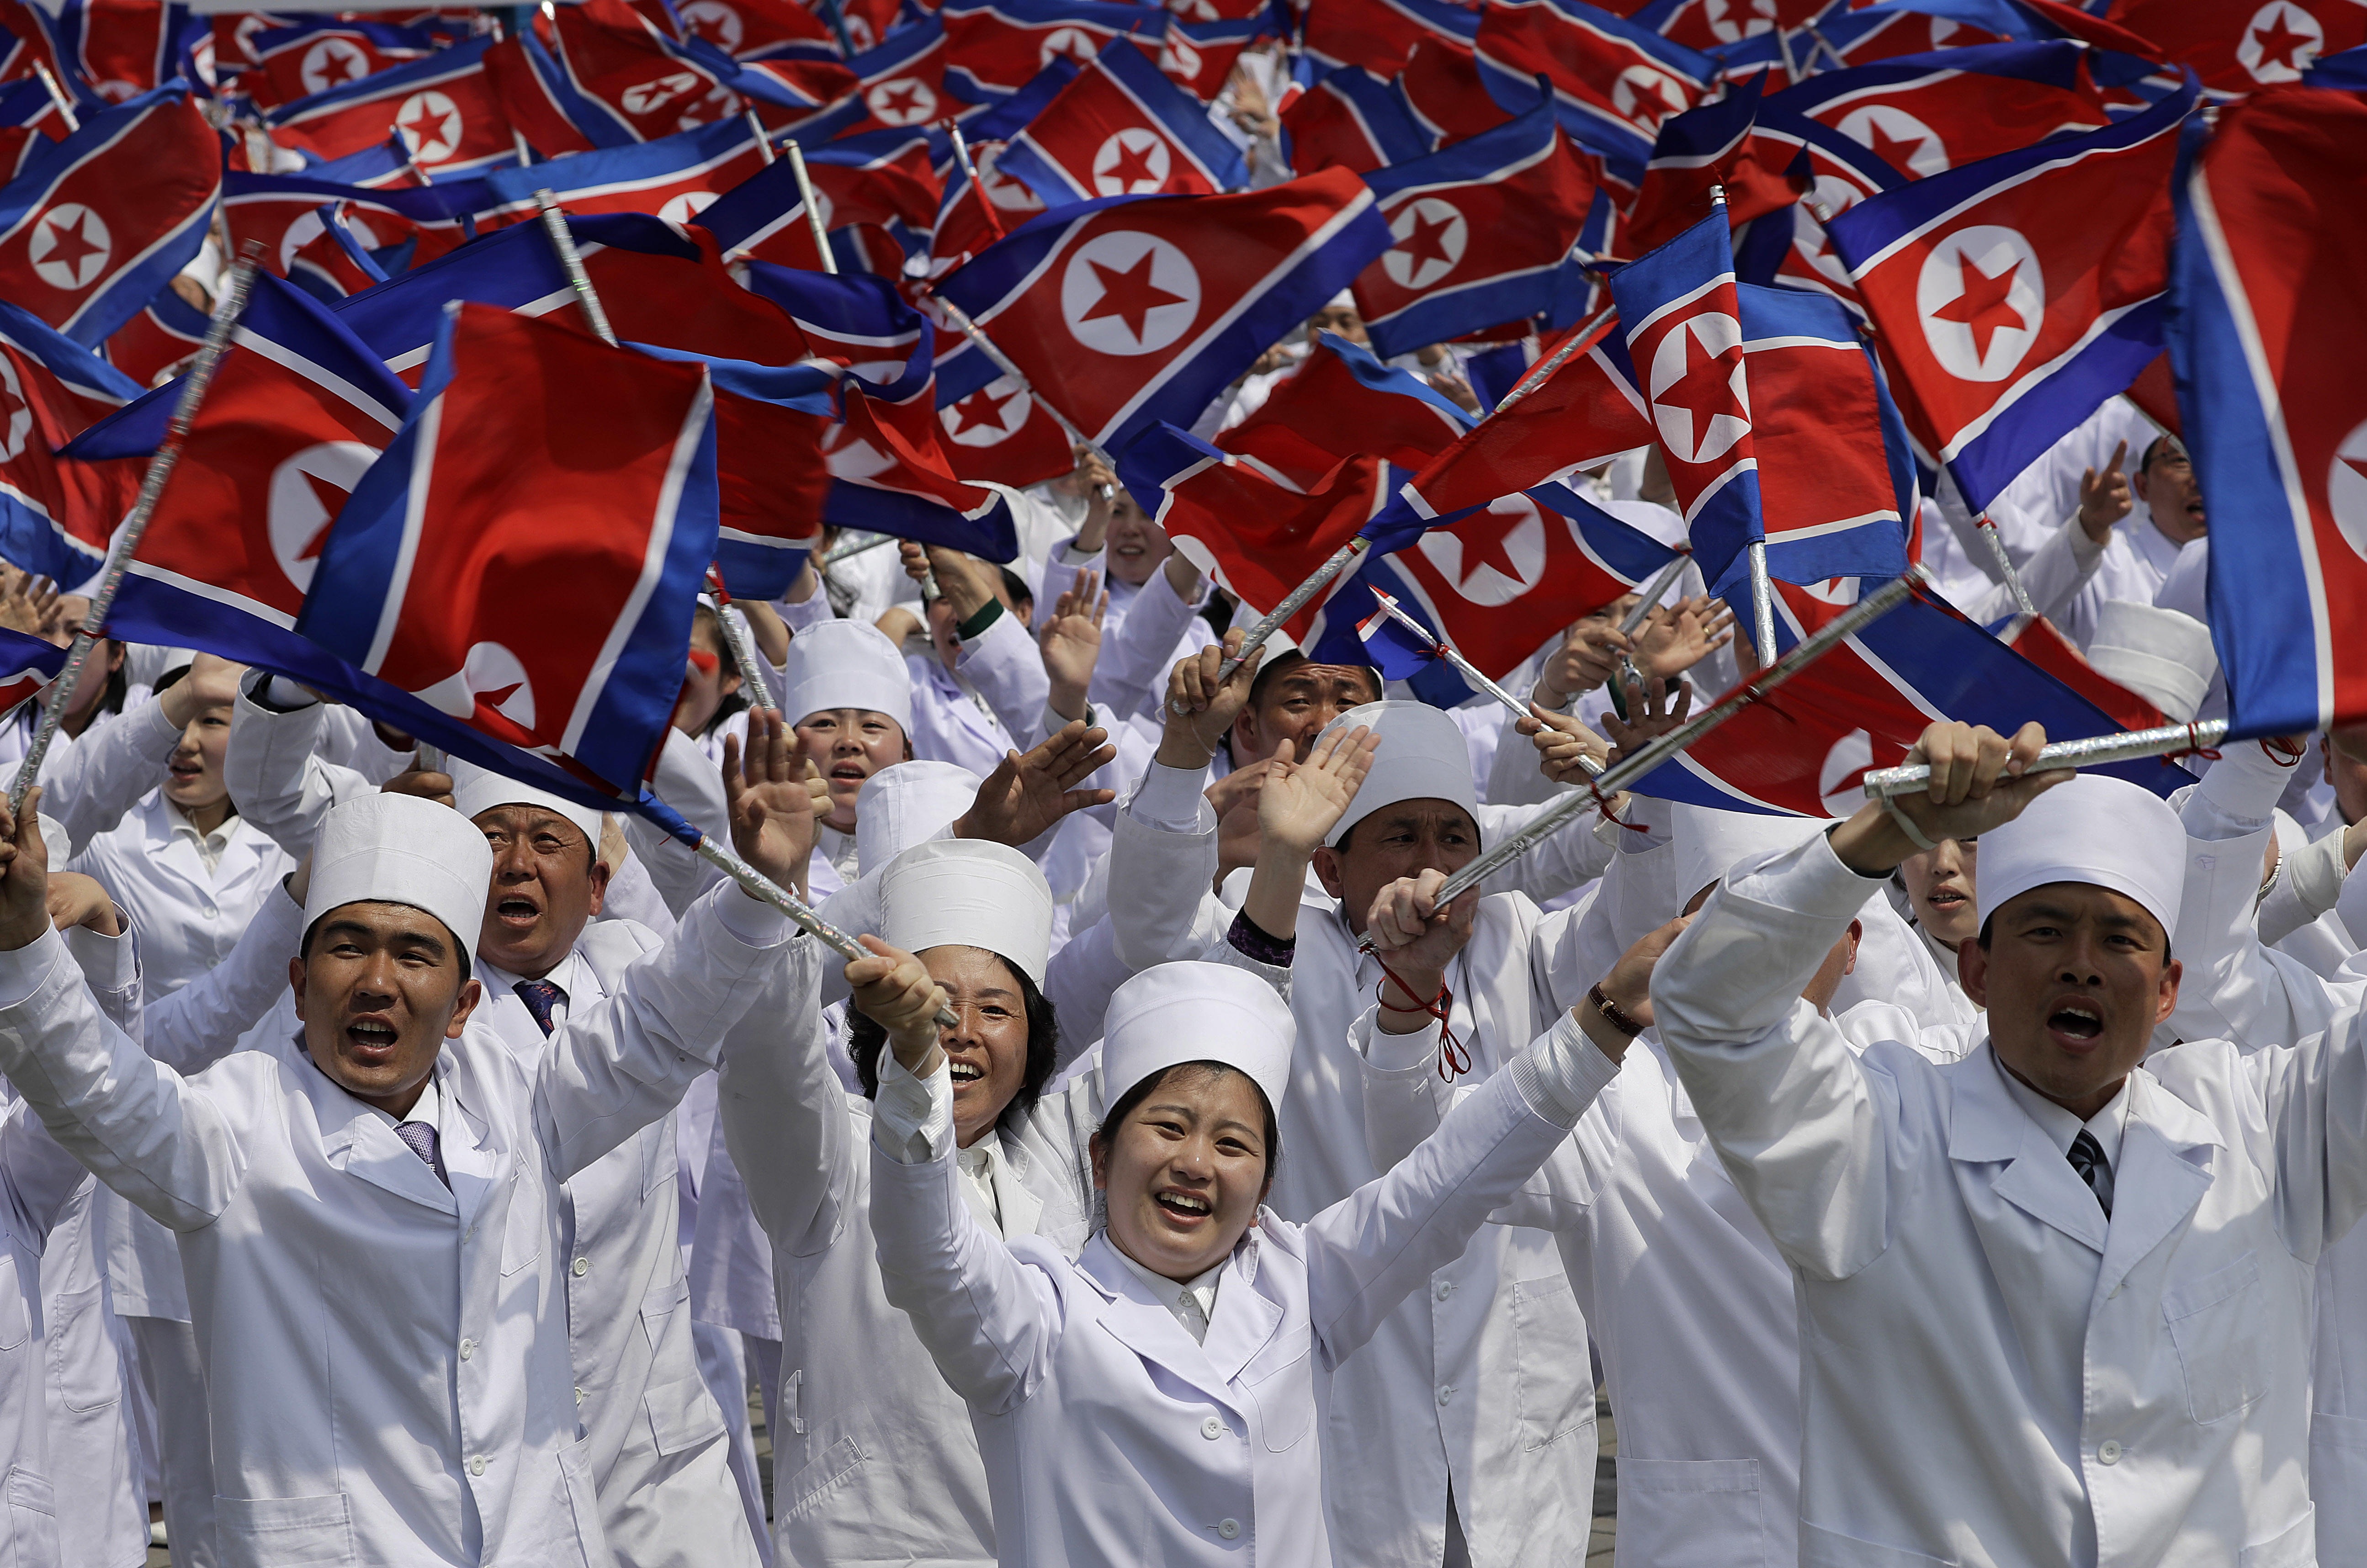 North Korean men and women dressed to represent doctors and other medical workers march across Kim Il Sung Square during a military parade on Saturday, April 15, 2017, in Pyongyang, North Korea to celebrate the 105th birth anniversary of Kim Il Sung, the country's late founder and grandfather of current ruler Kim Jong Un. (AP Photo/Wong Maye-E)